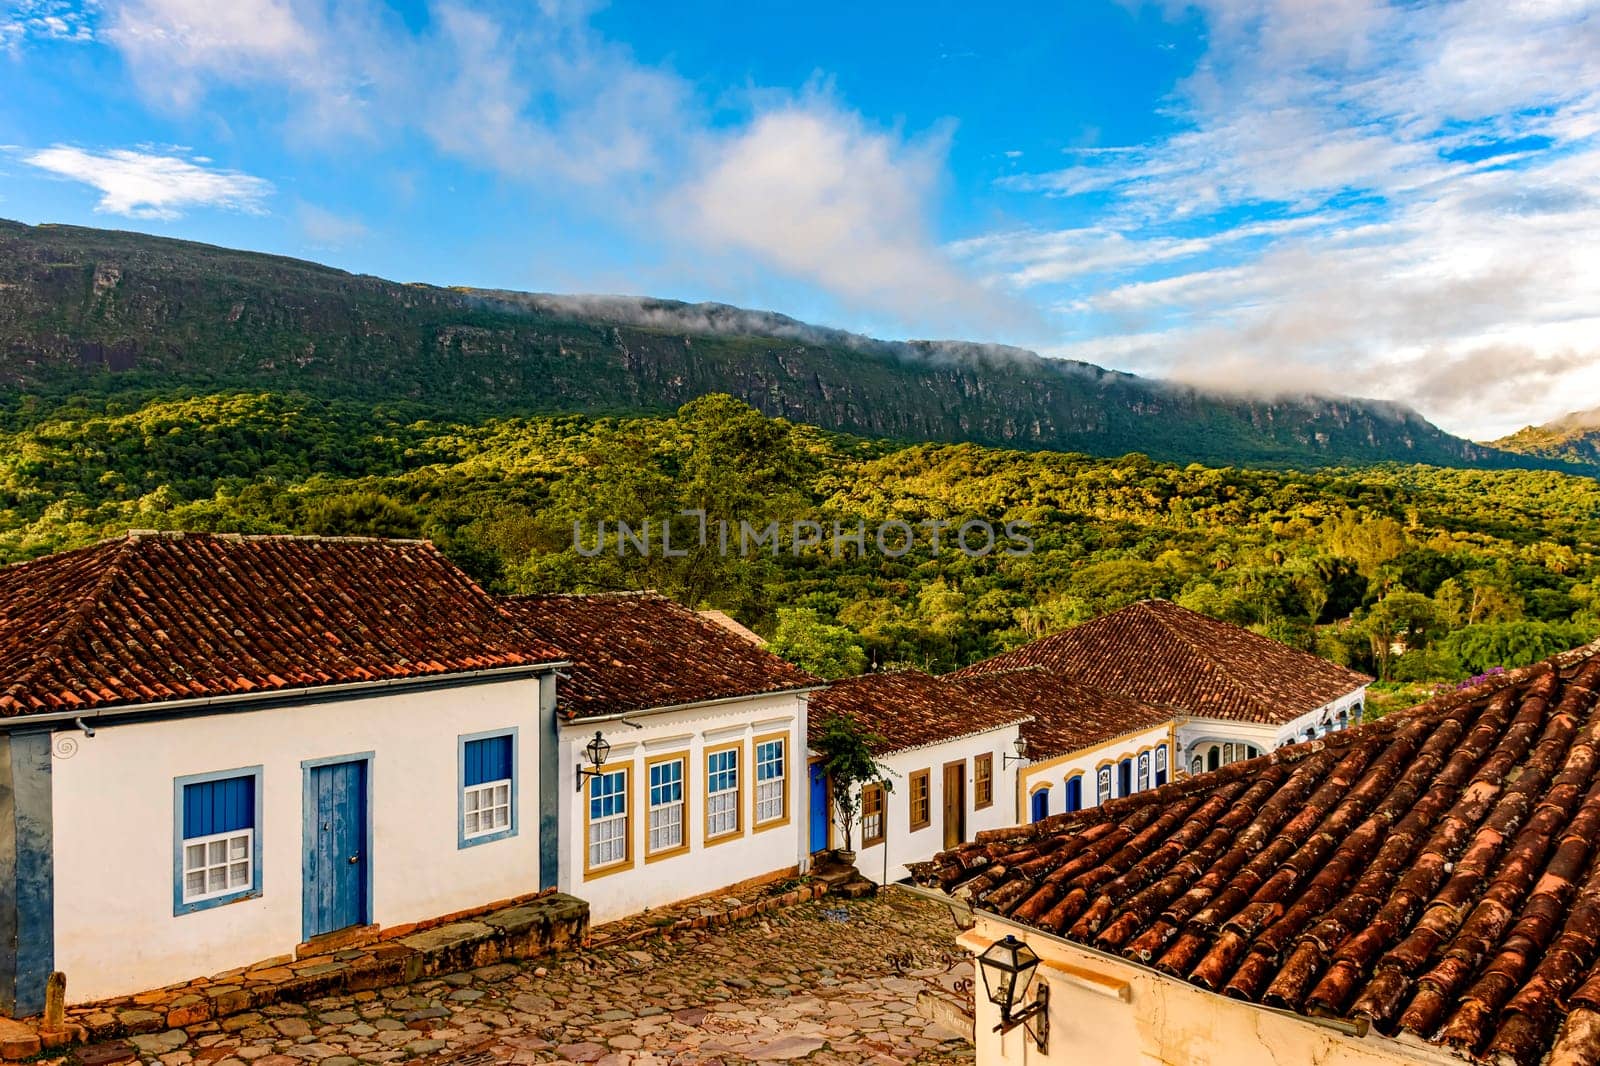 View of the old historic city of Tiradentes with its historic colonial-style houses and mountains in the background during the afternoon in Minas Gerais